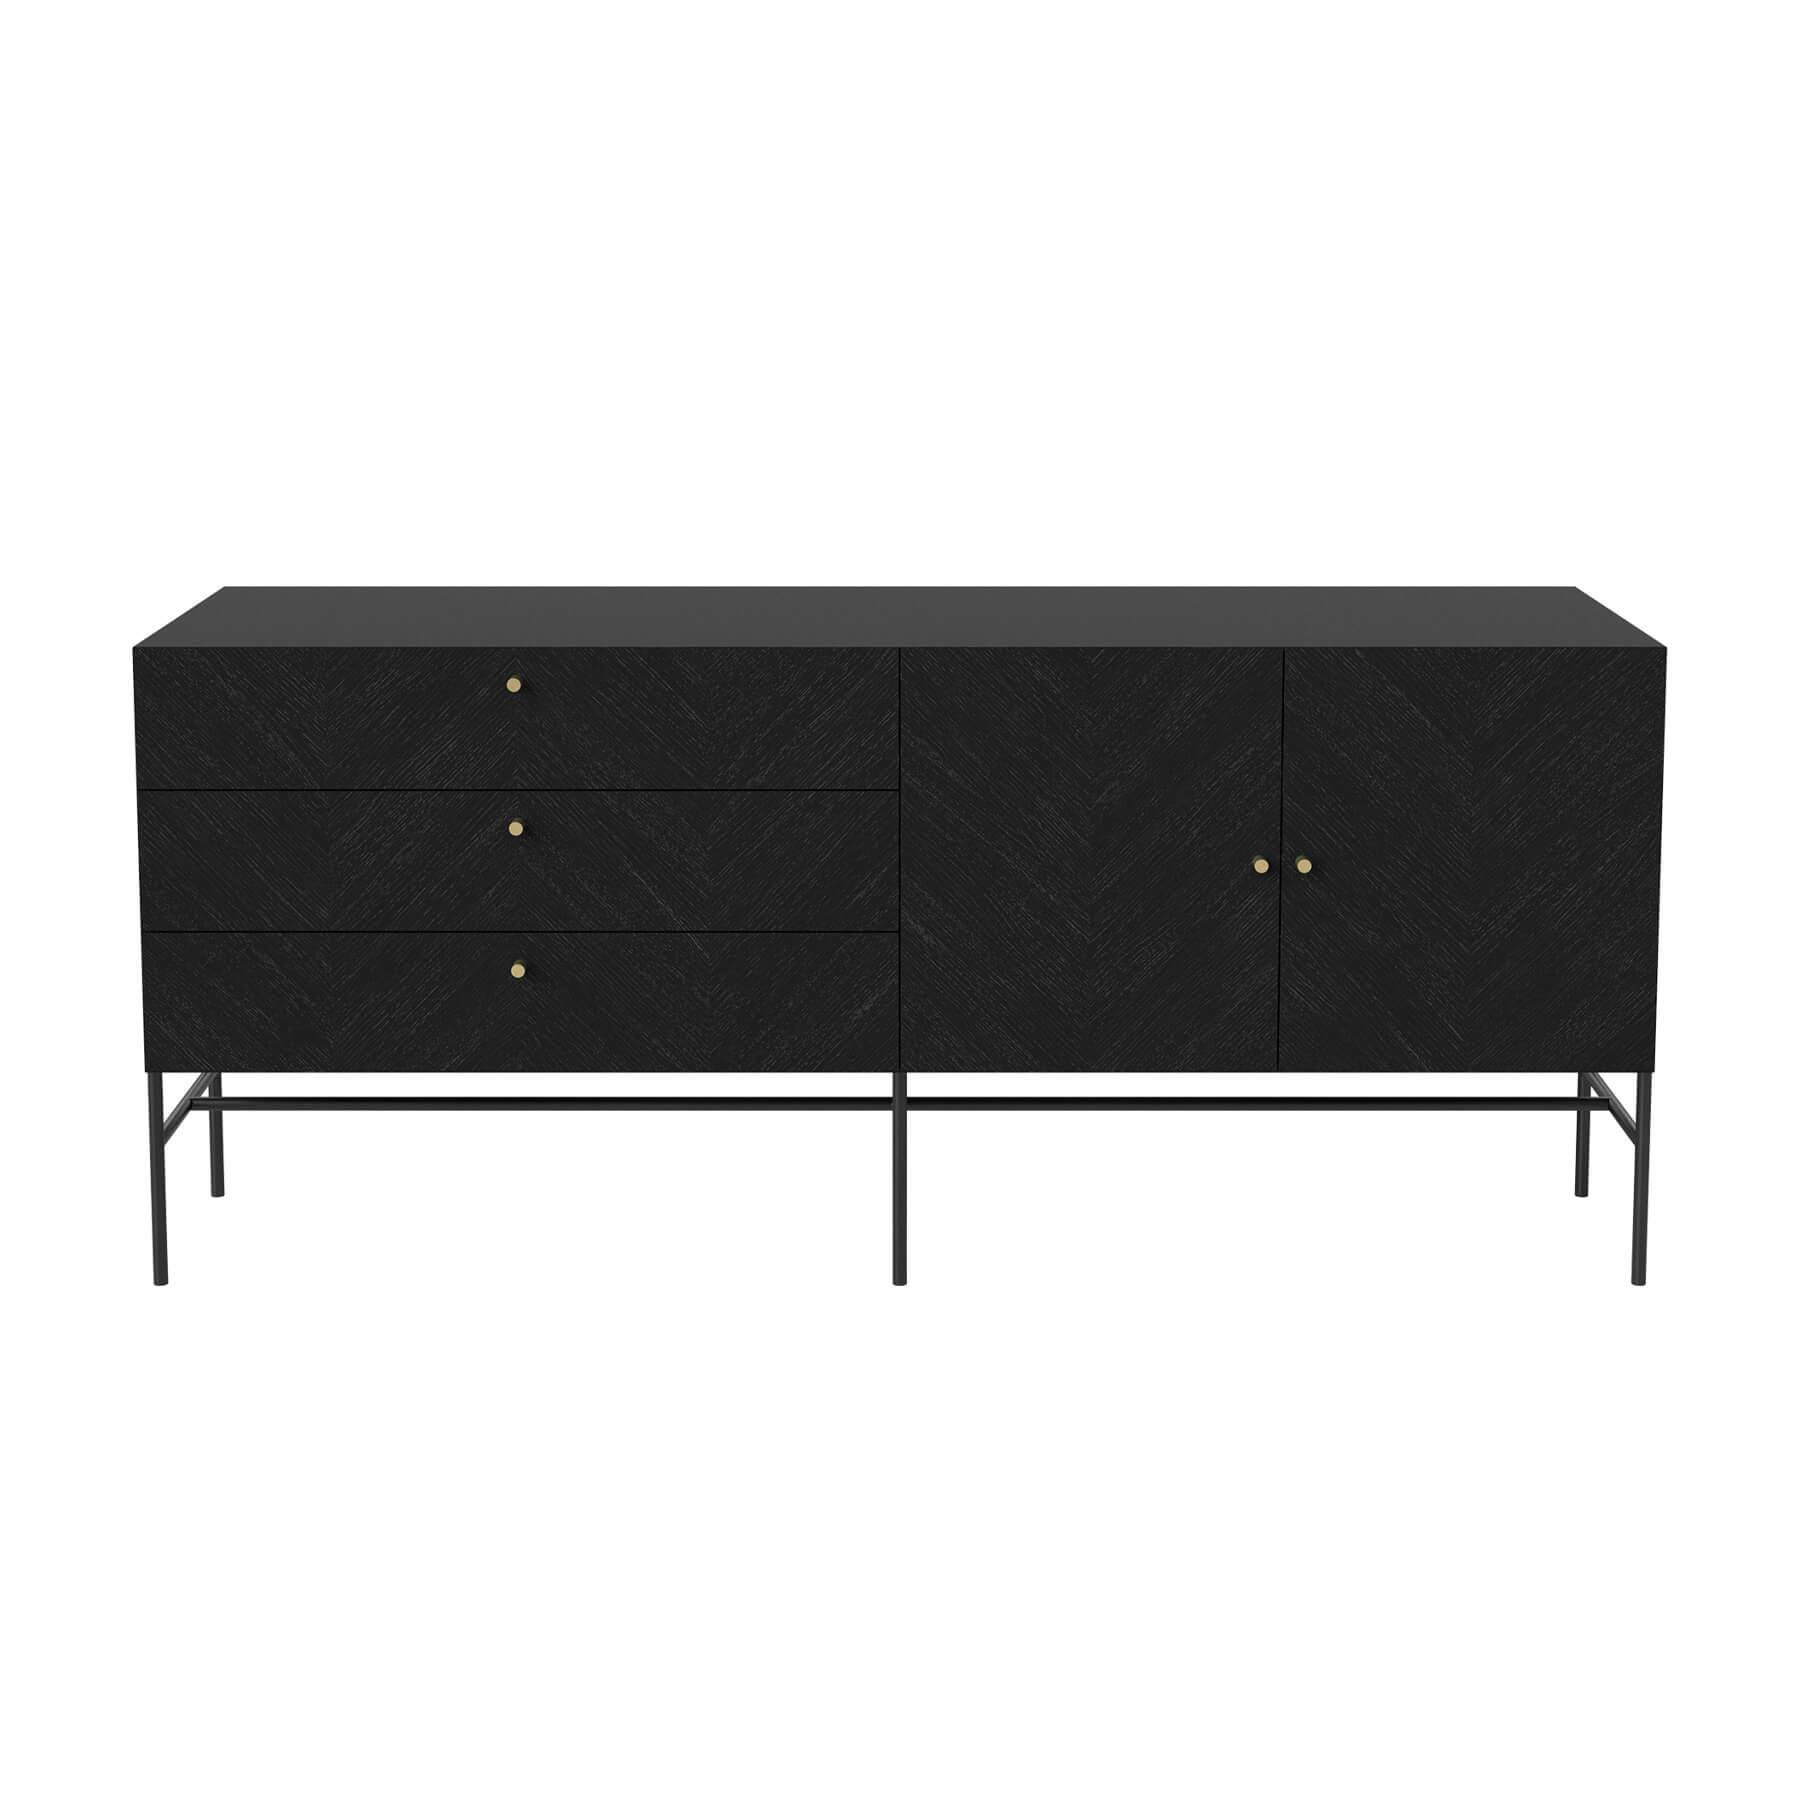 Bolia Luxe Sideboard Black Stained Oak Brass Door Knobs Designer Furniture From Holloways Of Ludlow